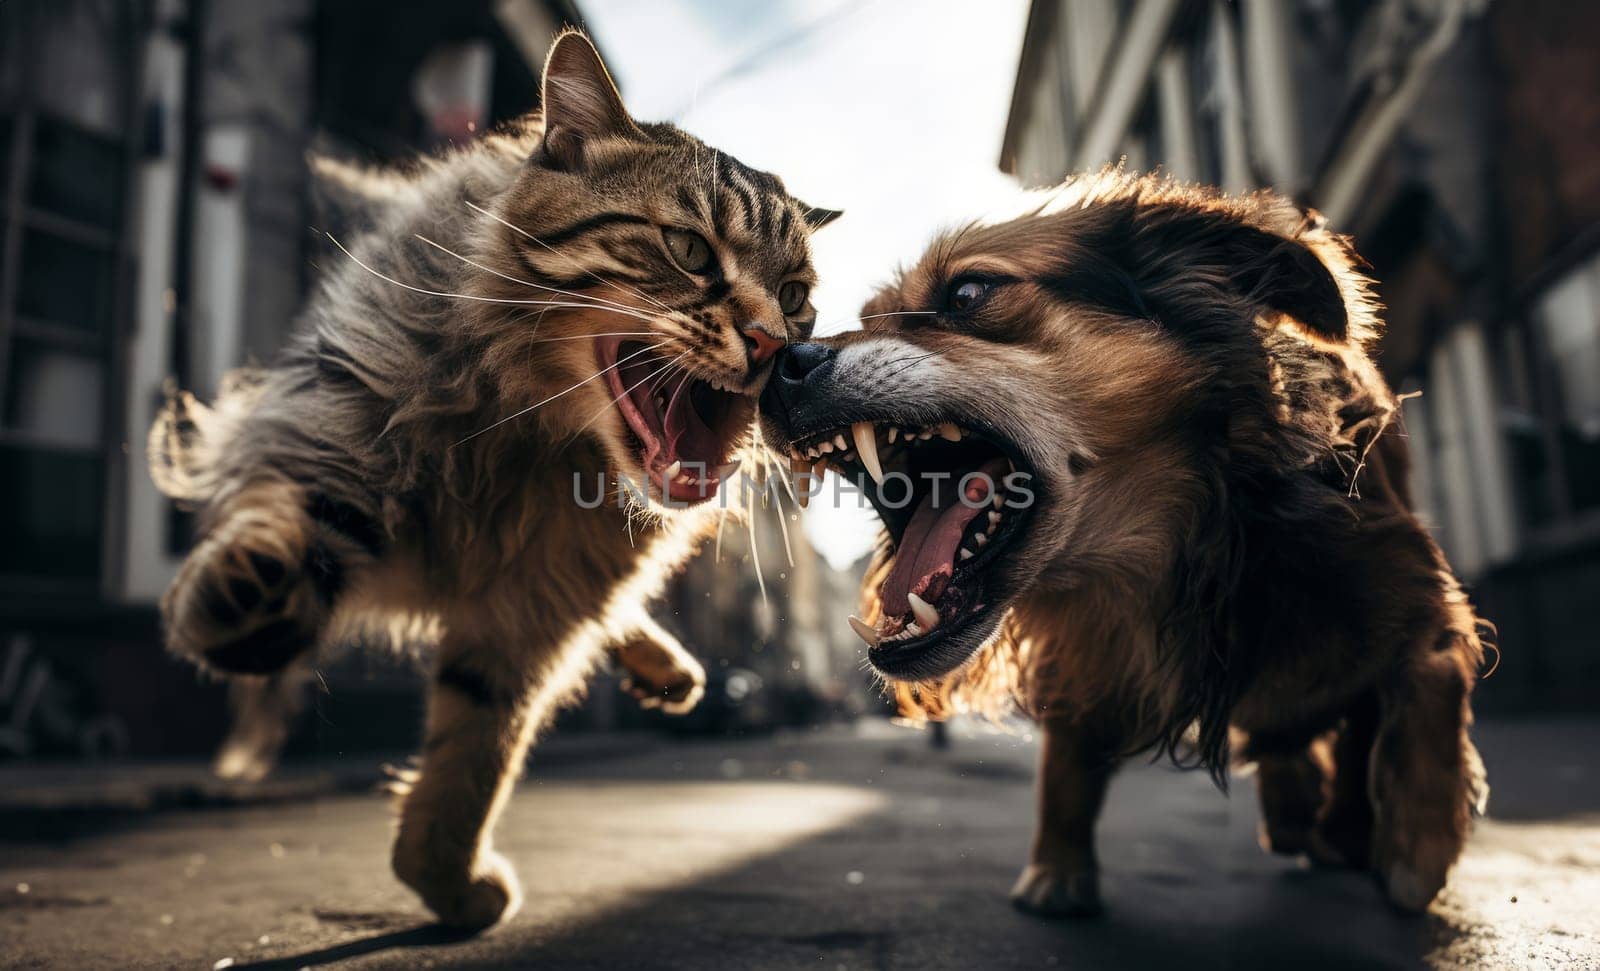 Street Showdown: Intense Encounter Between Cat and Dog Up Close.Generated image by dotshock